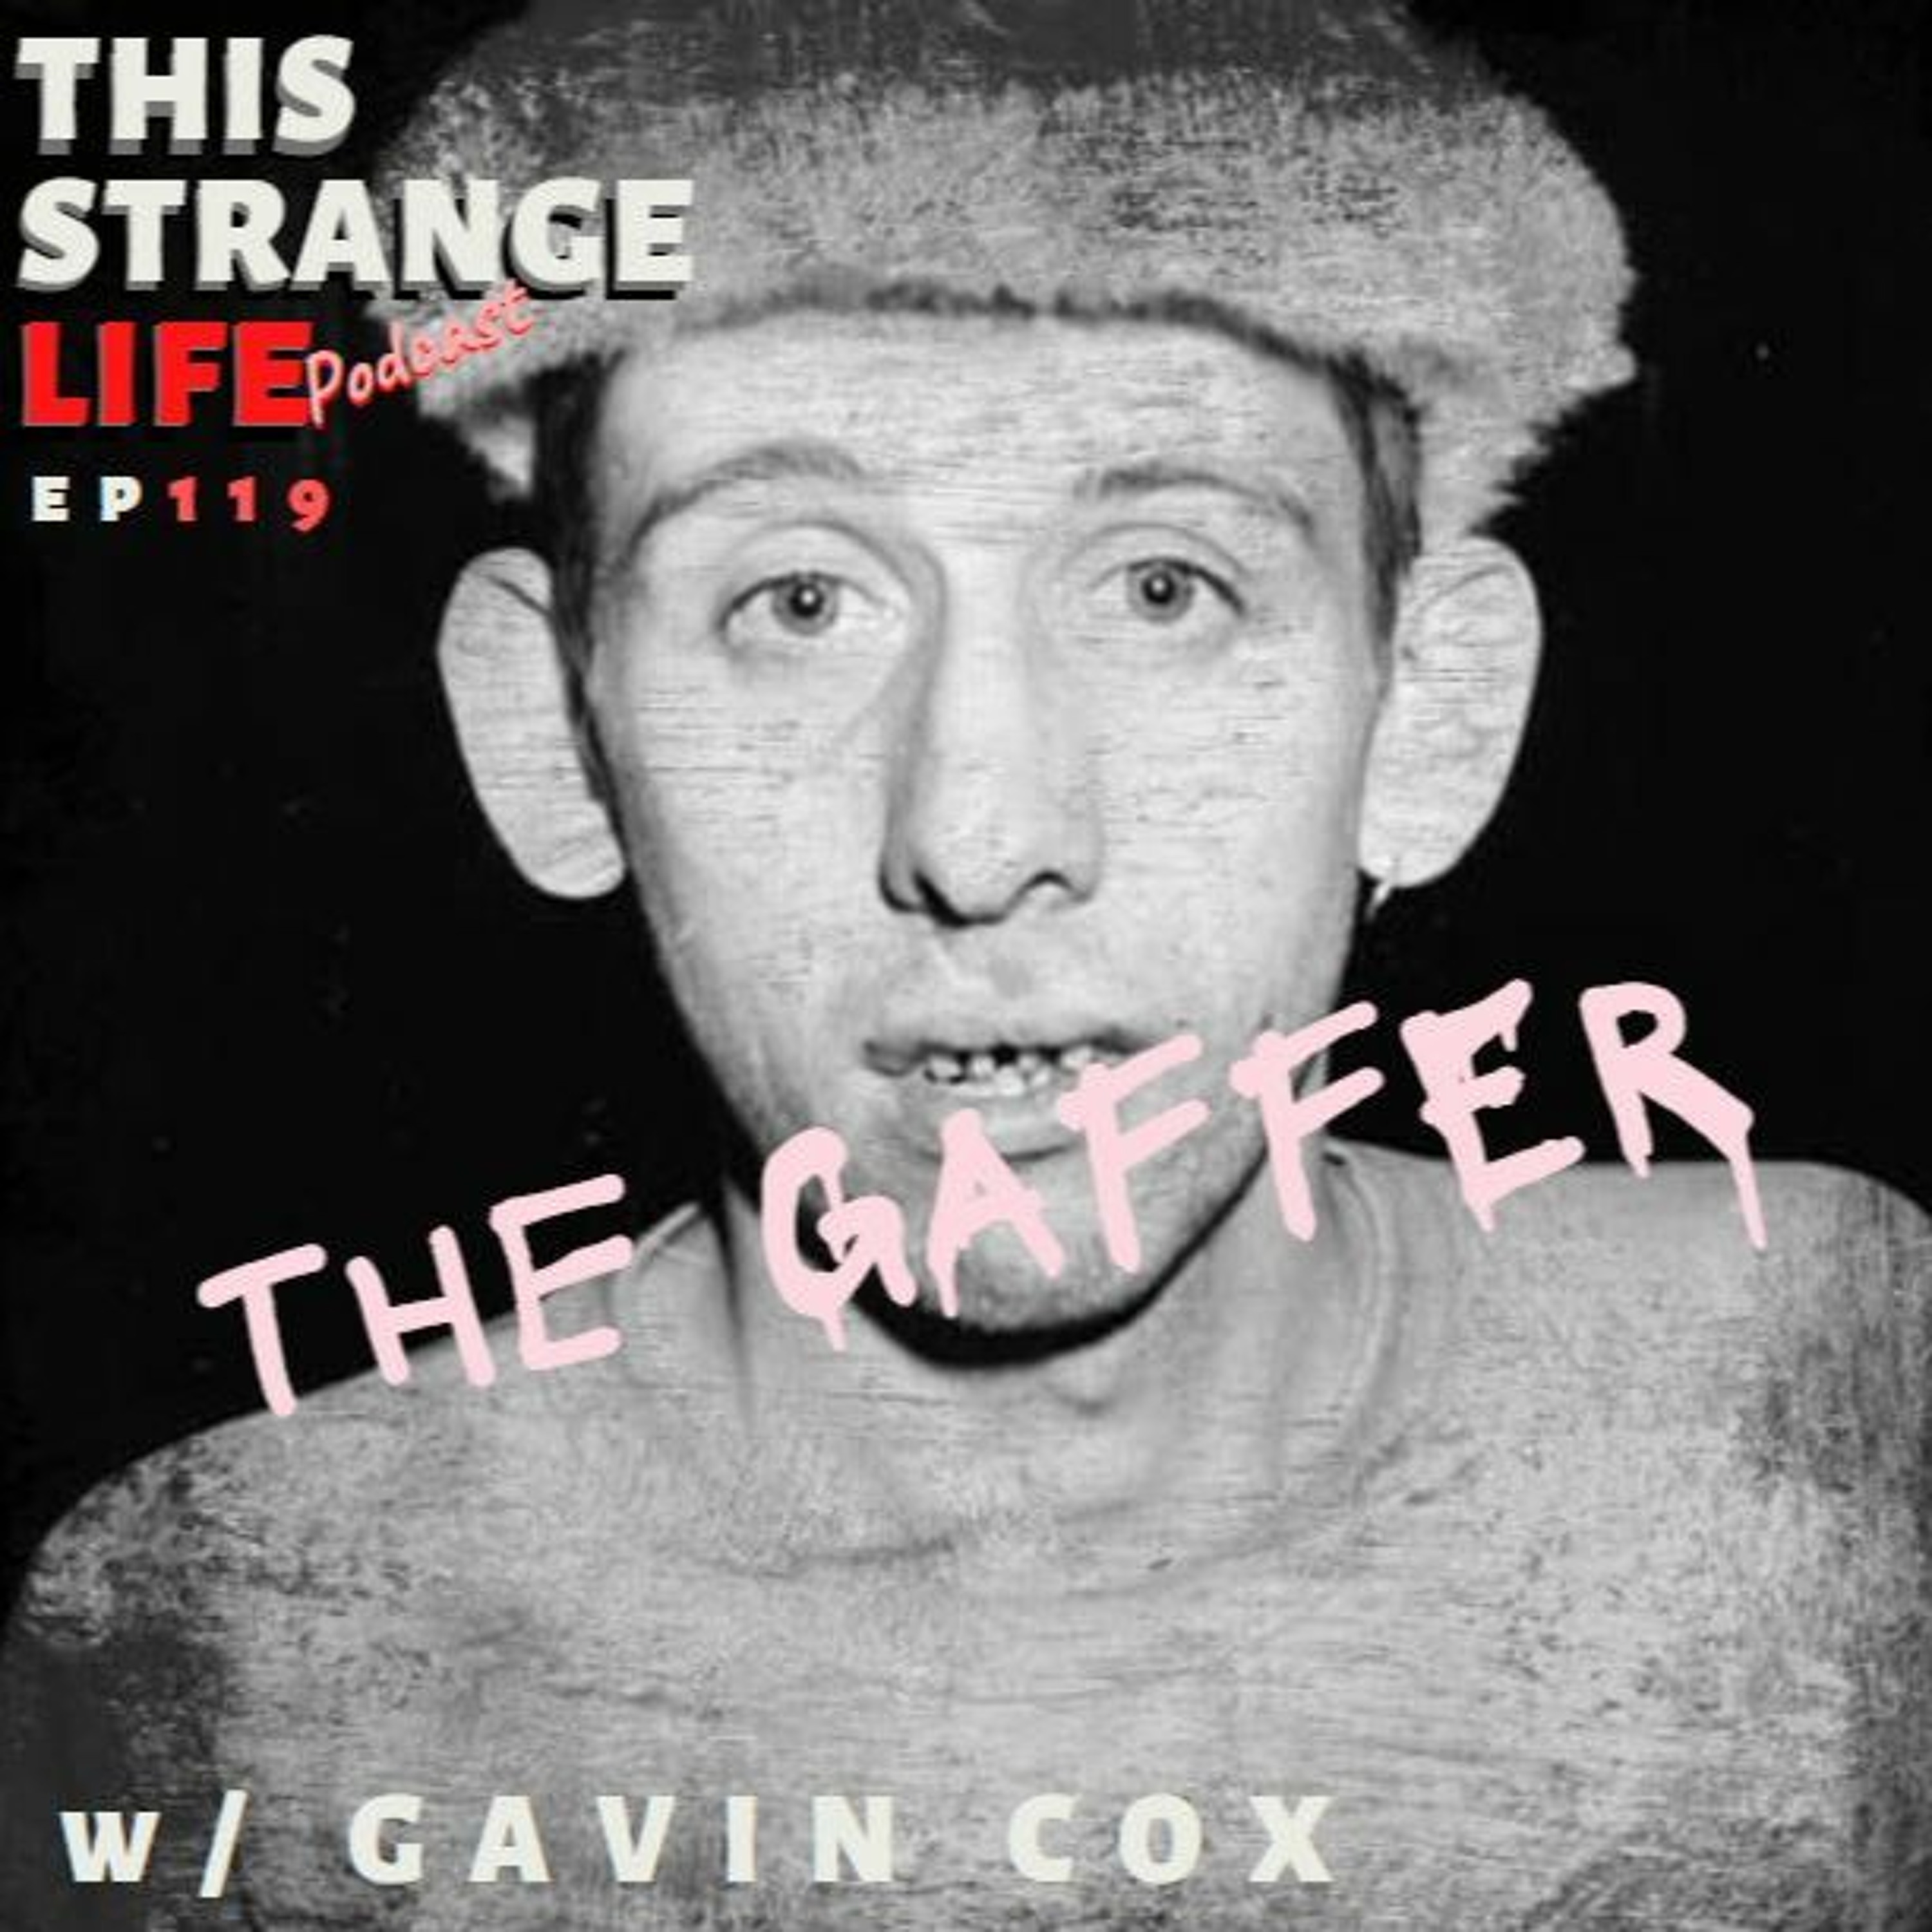 GAV ”THE GAFFER COX | Bangkok Bar Culture, Cancel Culture & State of play in the US of A